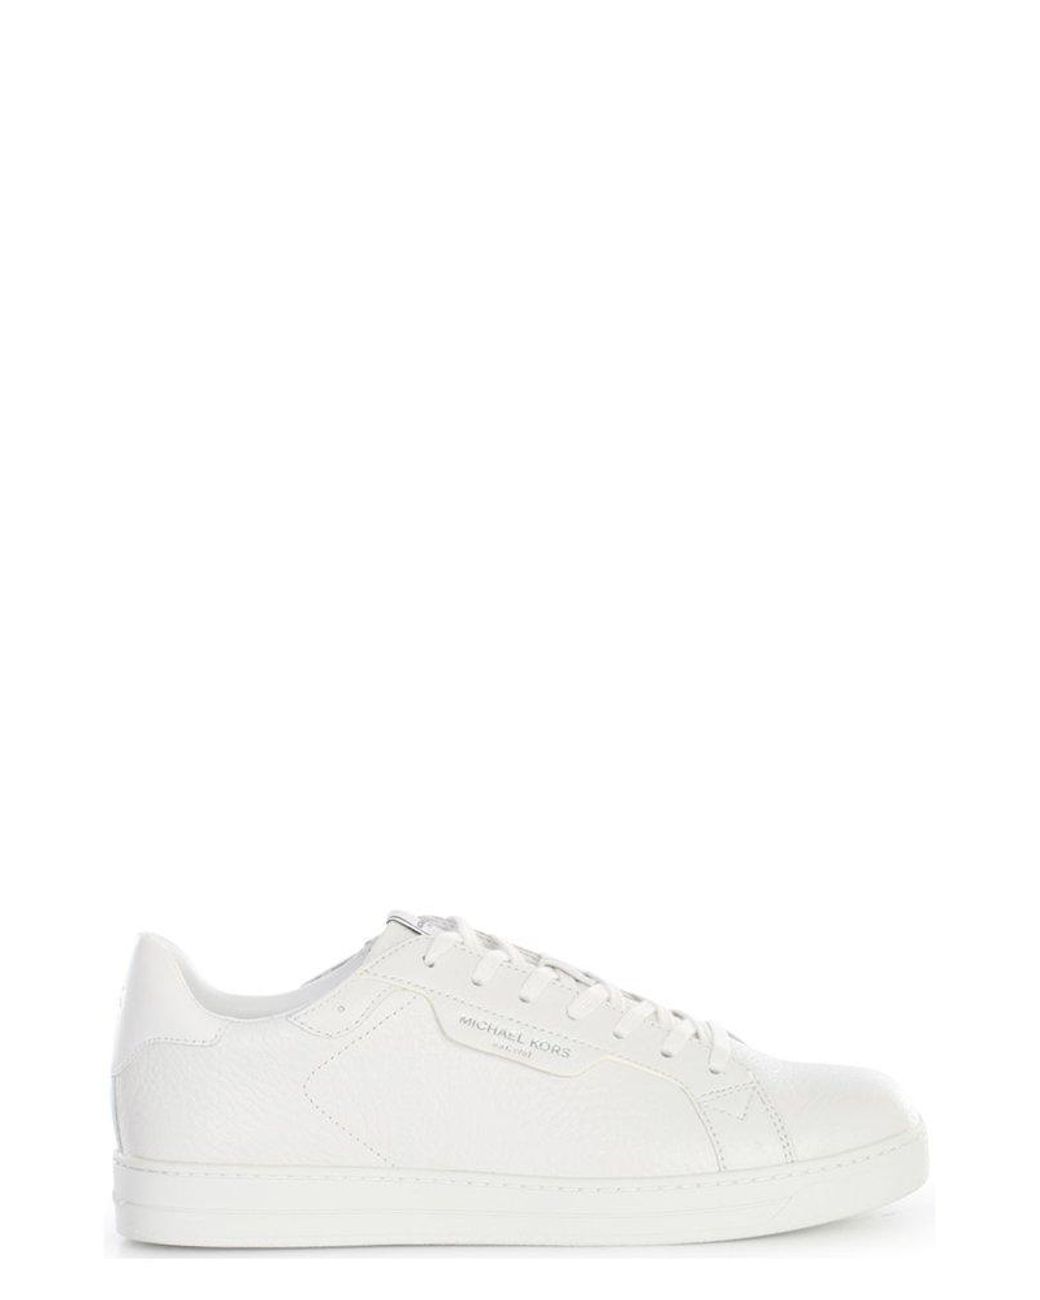 Michael Kors Keating Lace-up Sneakers in White for Men | Lyst